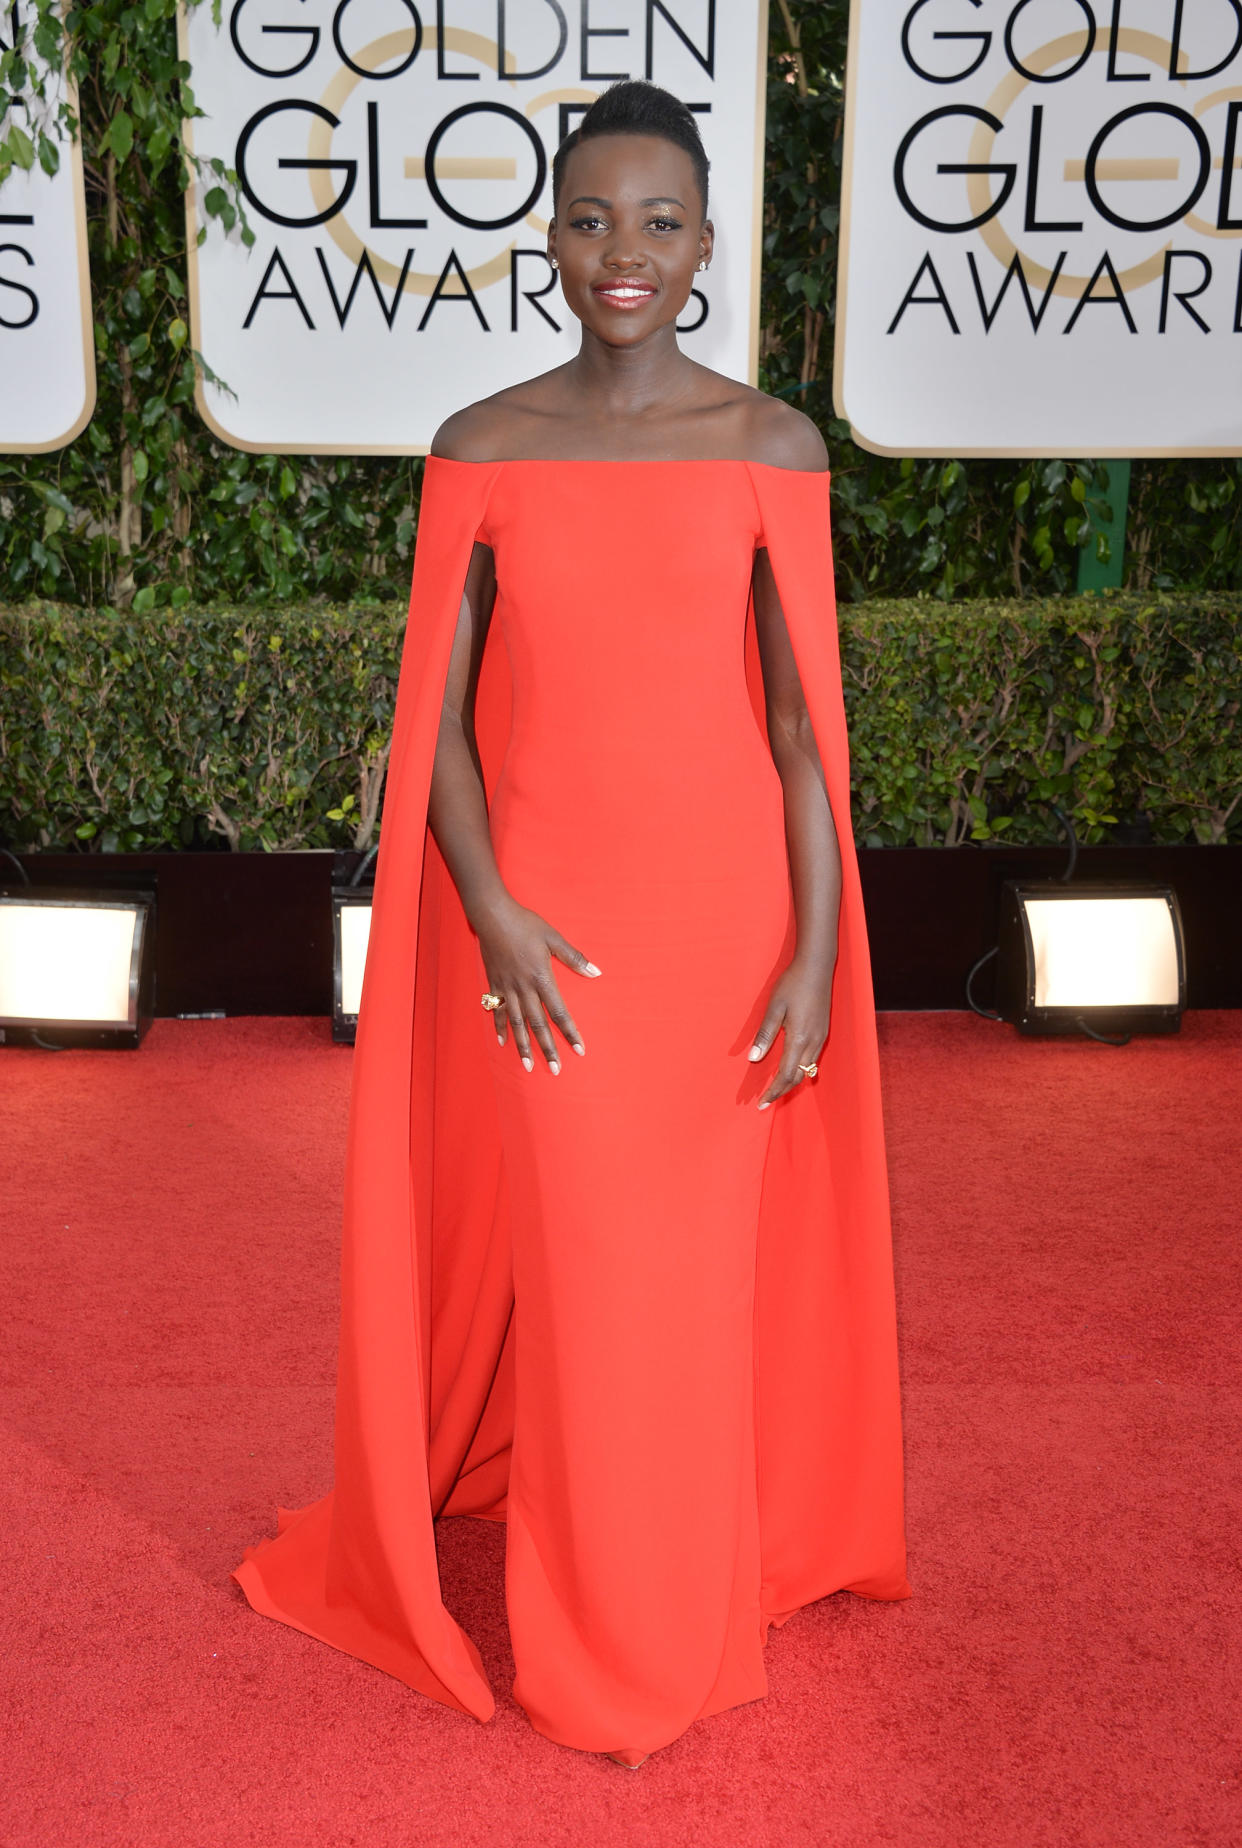 Lupita Nyong'o on the 2014 Golden Globes red carpet wearing a caped Ralph Lauren dress. (Getty Images)